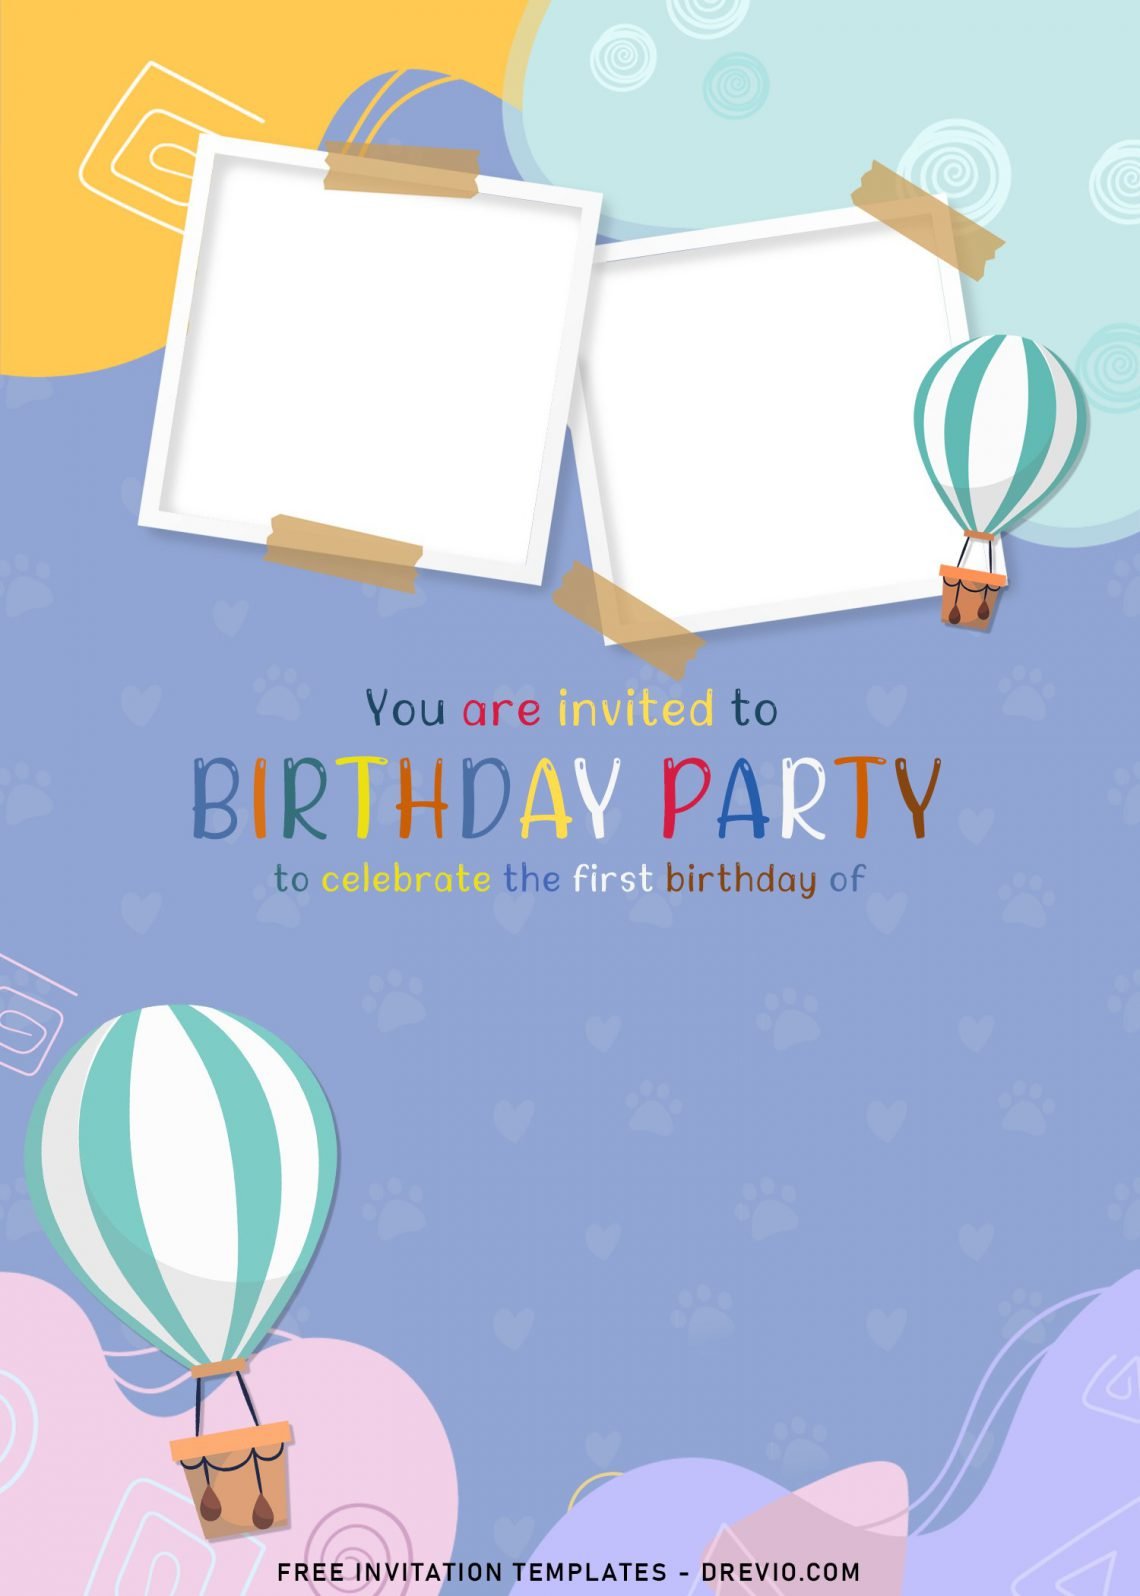 8+ Adorable Hot Air Balloon Birthday Invitation Templates For Your Kid ...